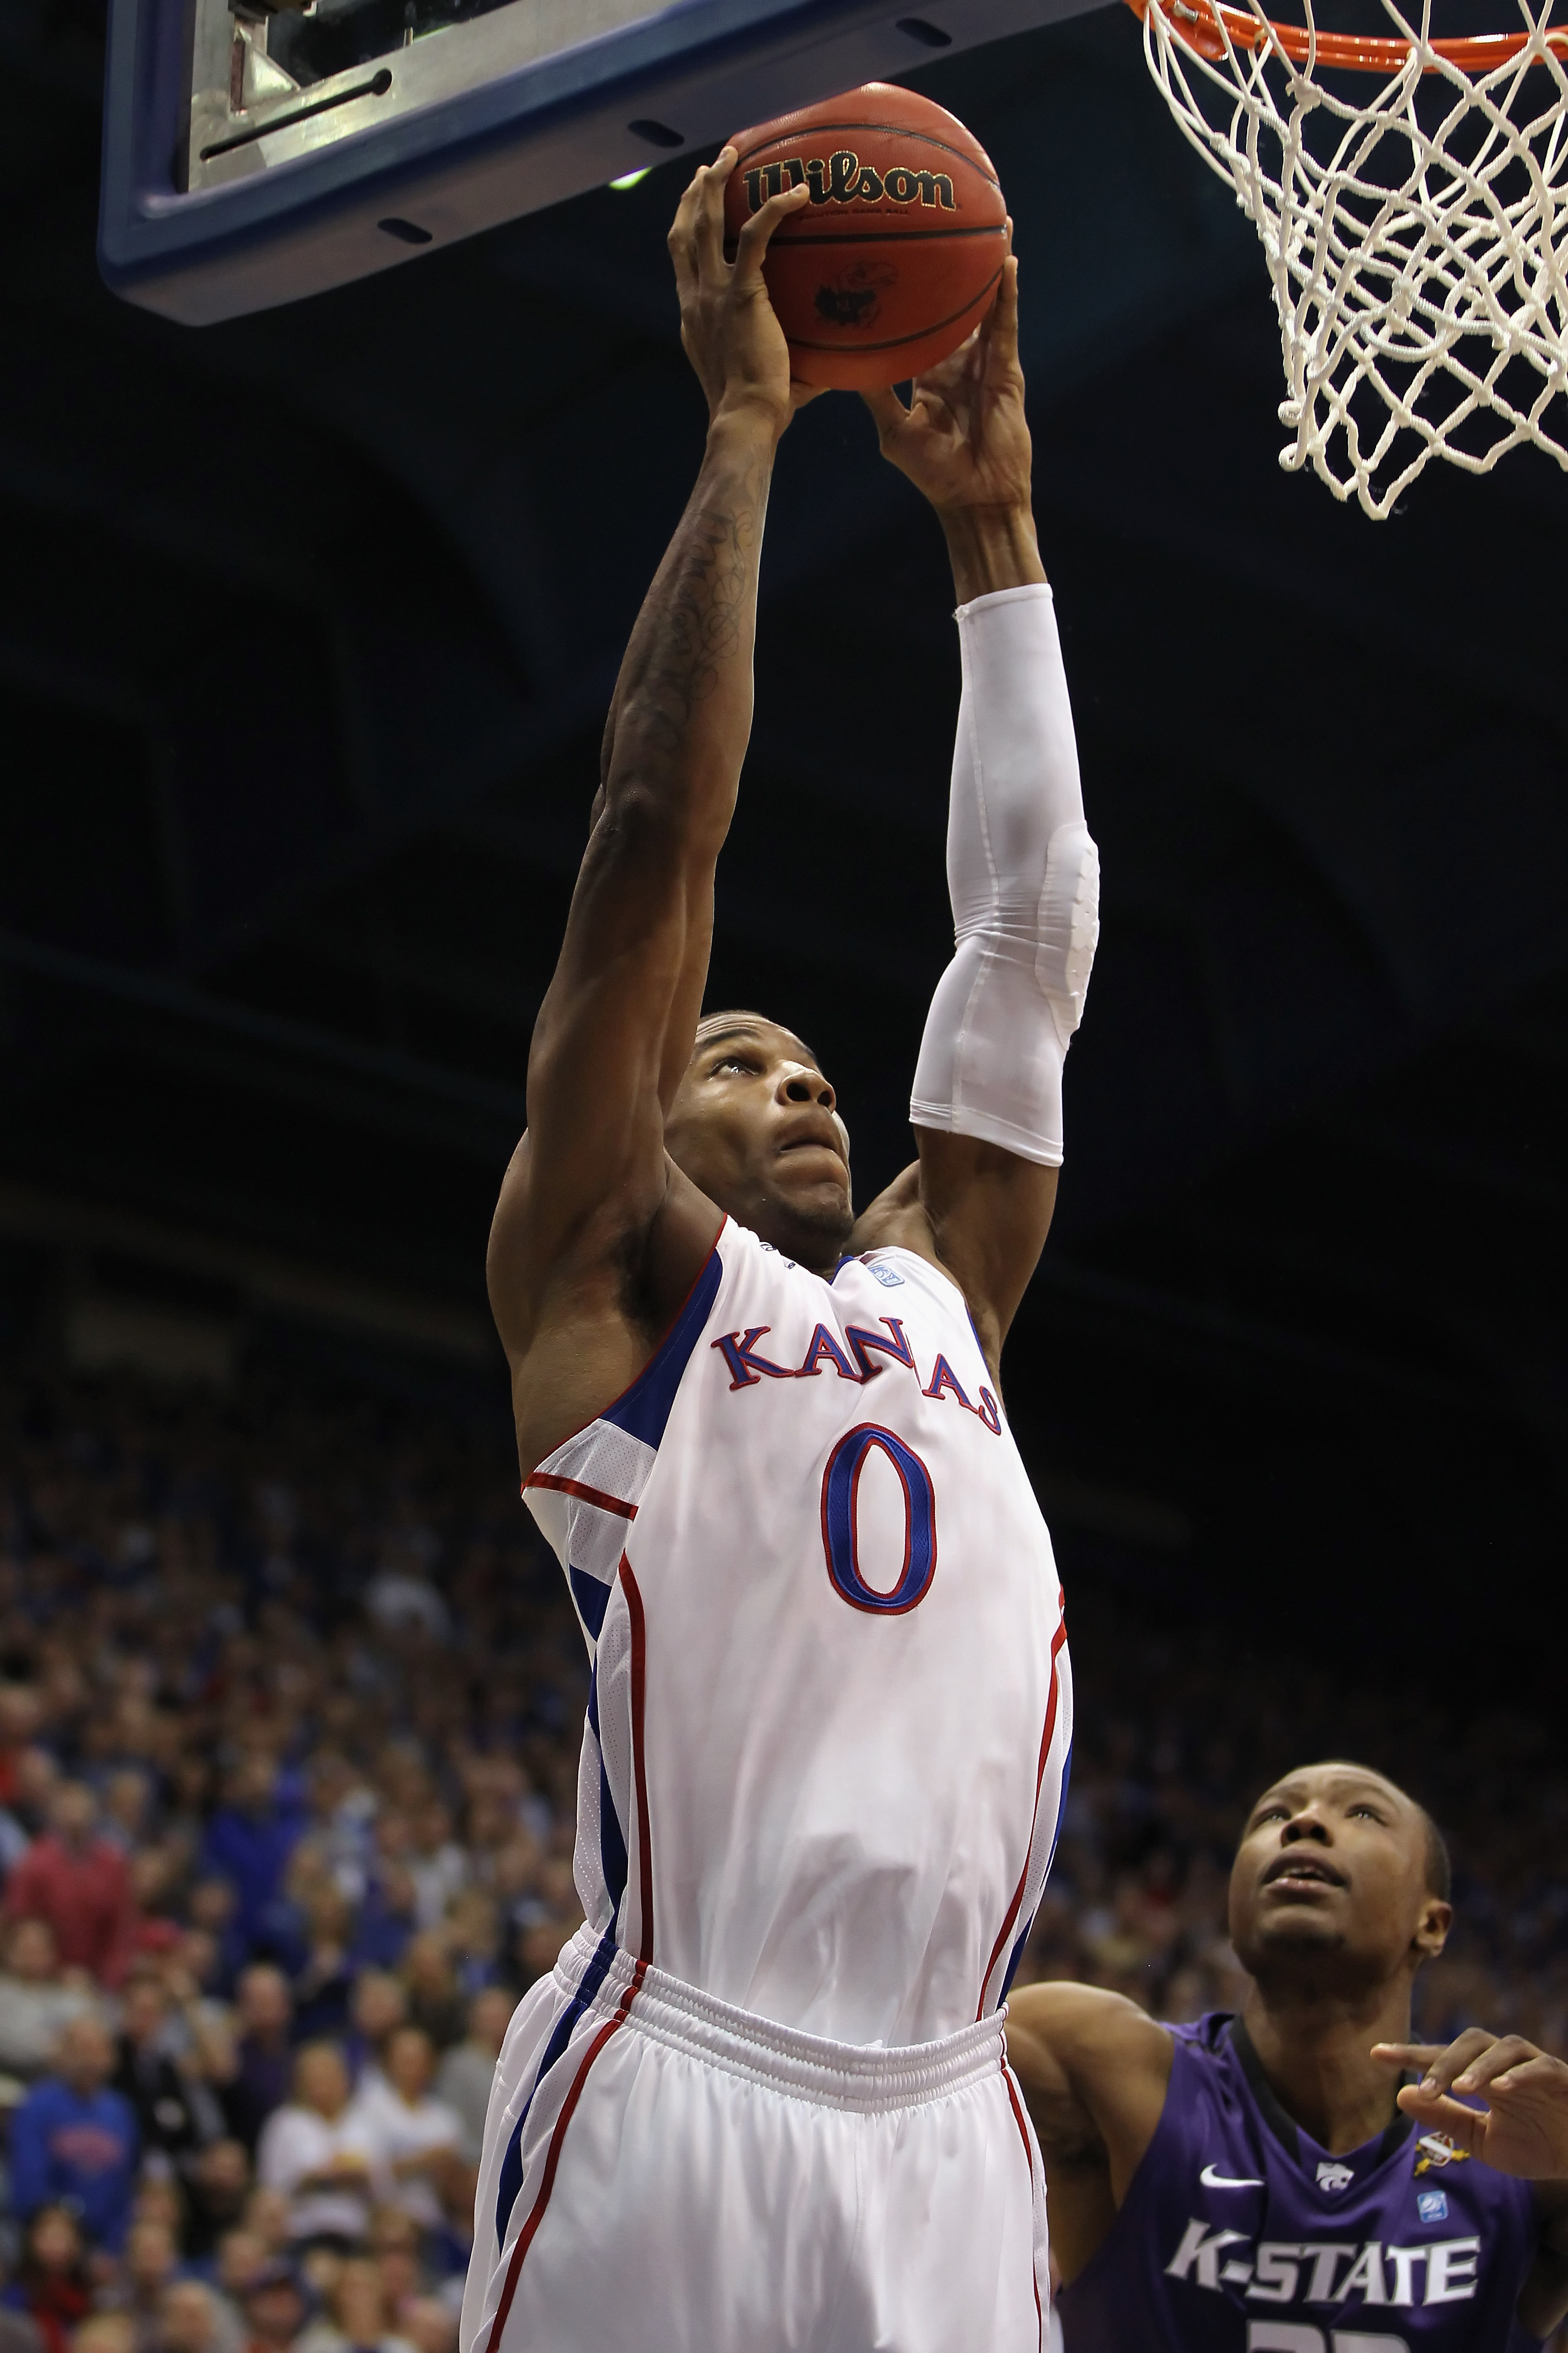 LAWRENCE, KS - JANUARY 29:  Thomas Robinson #0 of the Kansas Jayhawks dunks during the game against the Kansas State Wildcats on January 29, 2011 at Allen Fieldhouse in Lawrence, Kansas.  (Photo by Jamie Squire/Getty Images)